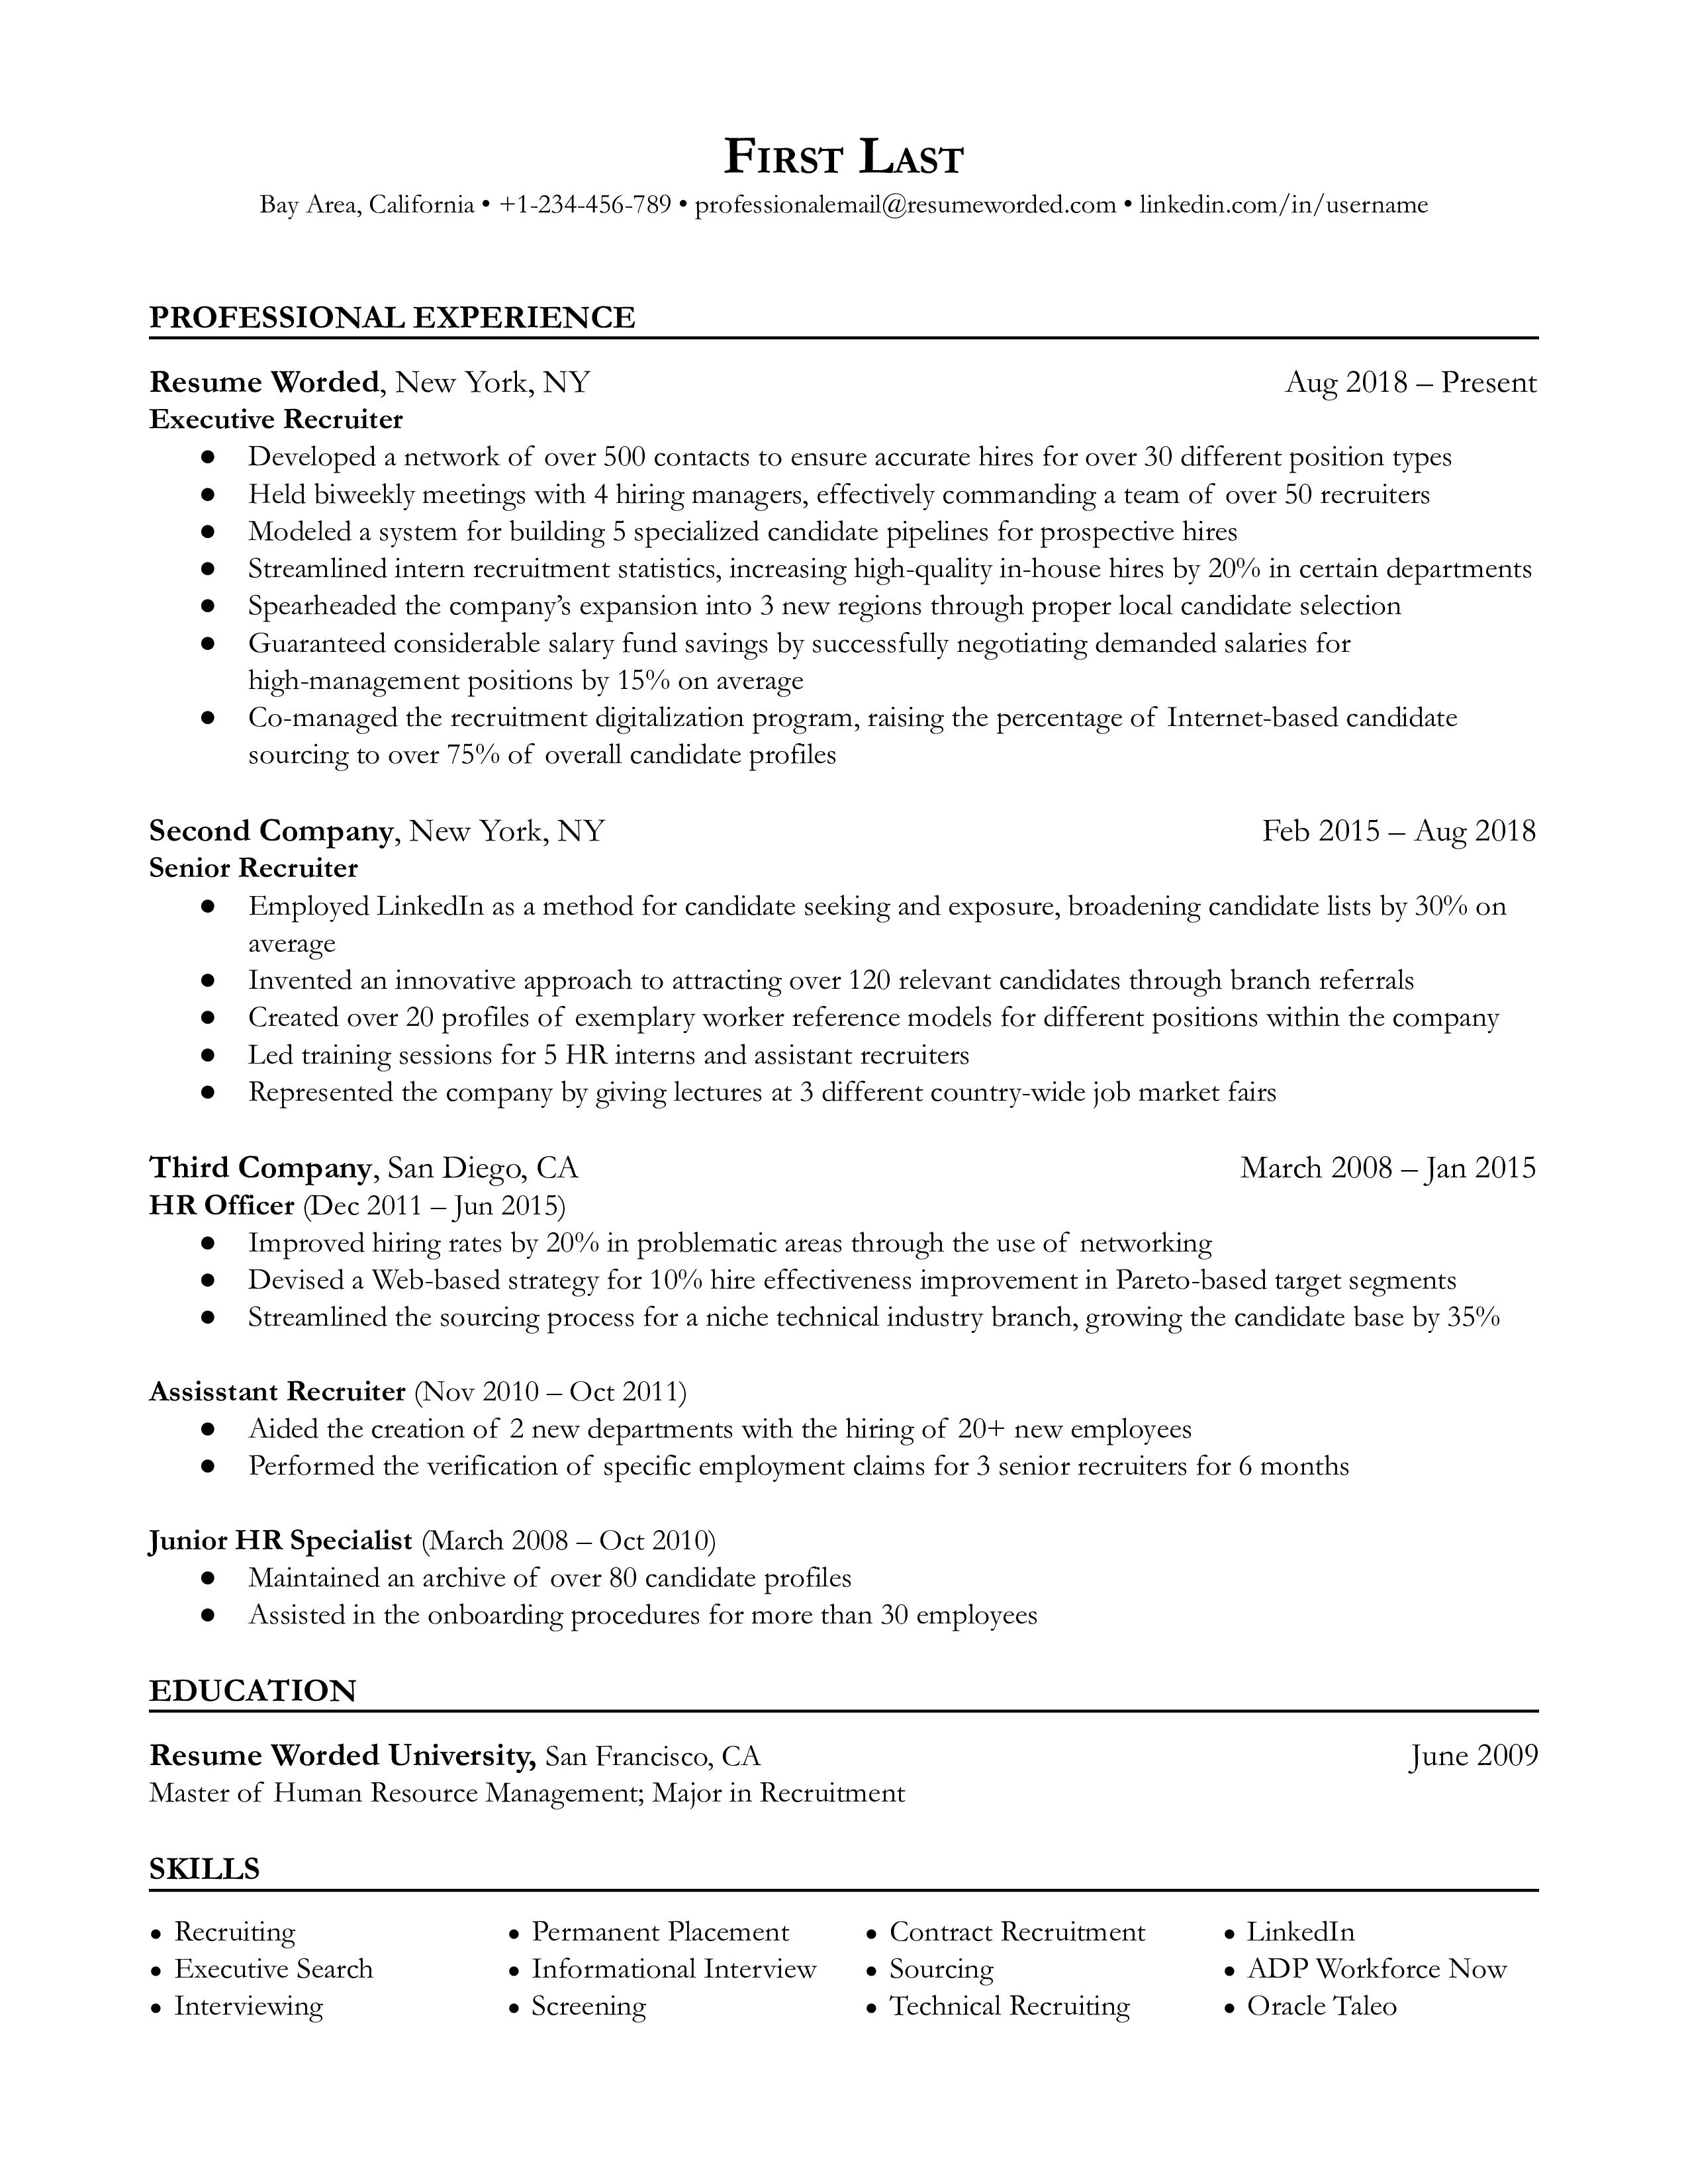 An executive recruiter sample resume that highlights leadership and managerial experience as well as career progression.